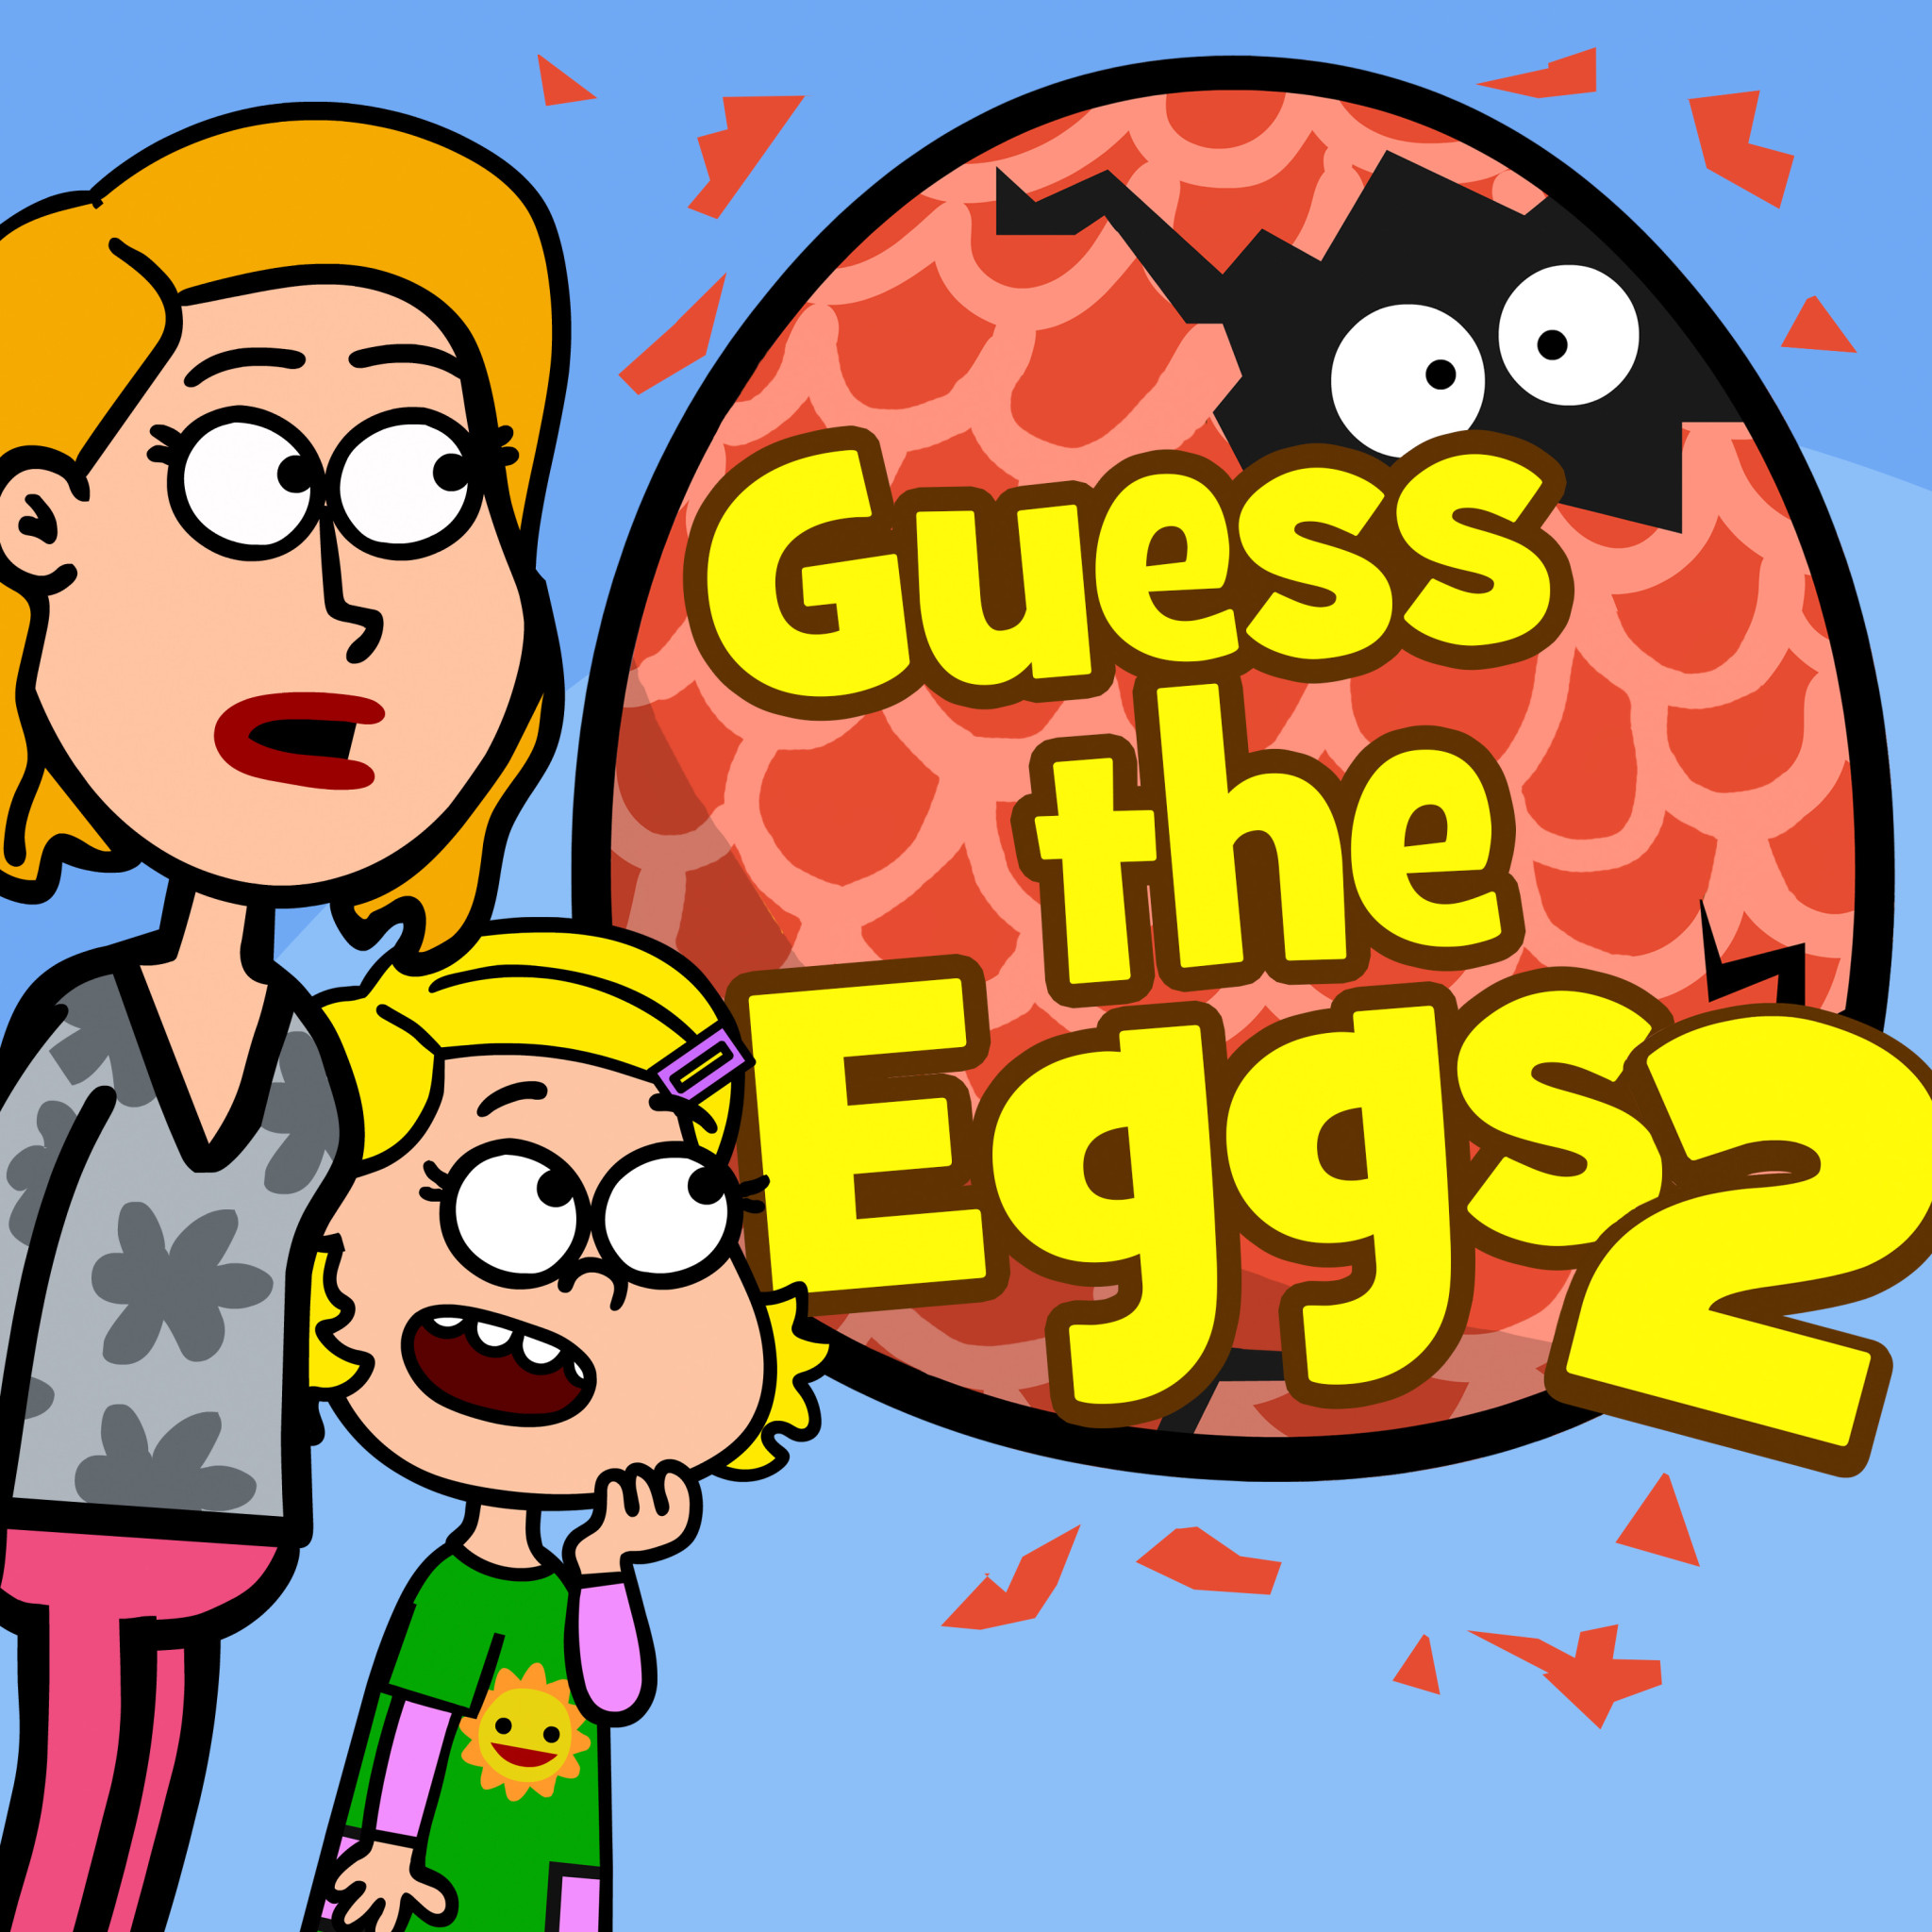 Guess the Eggs 2